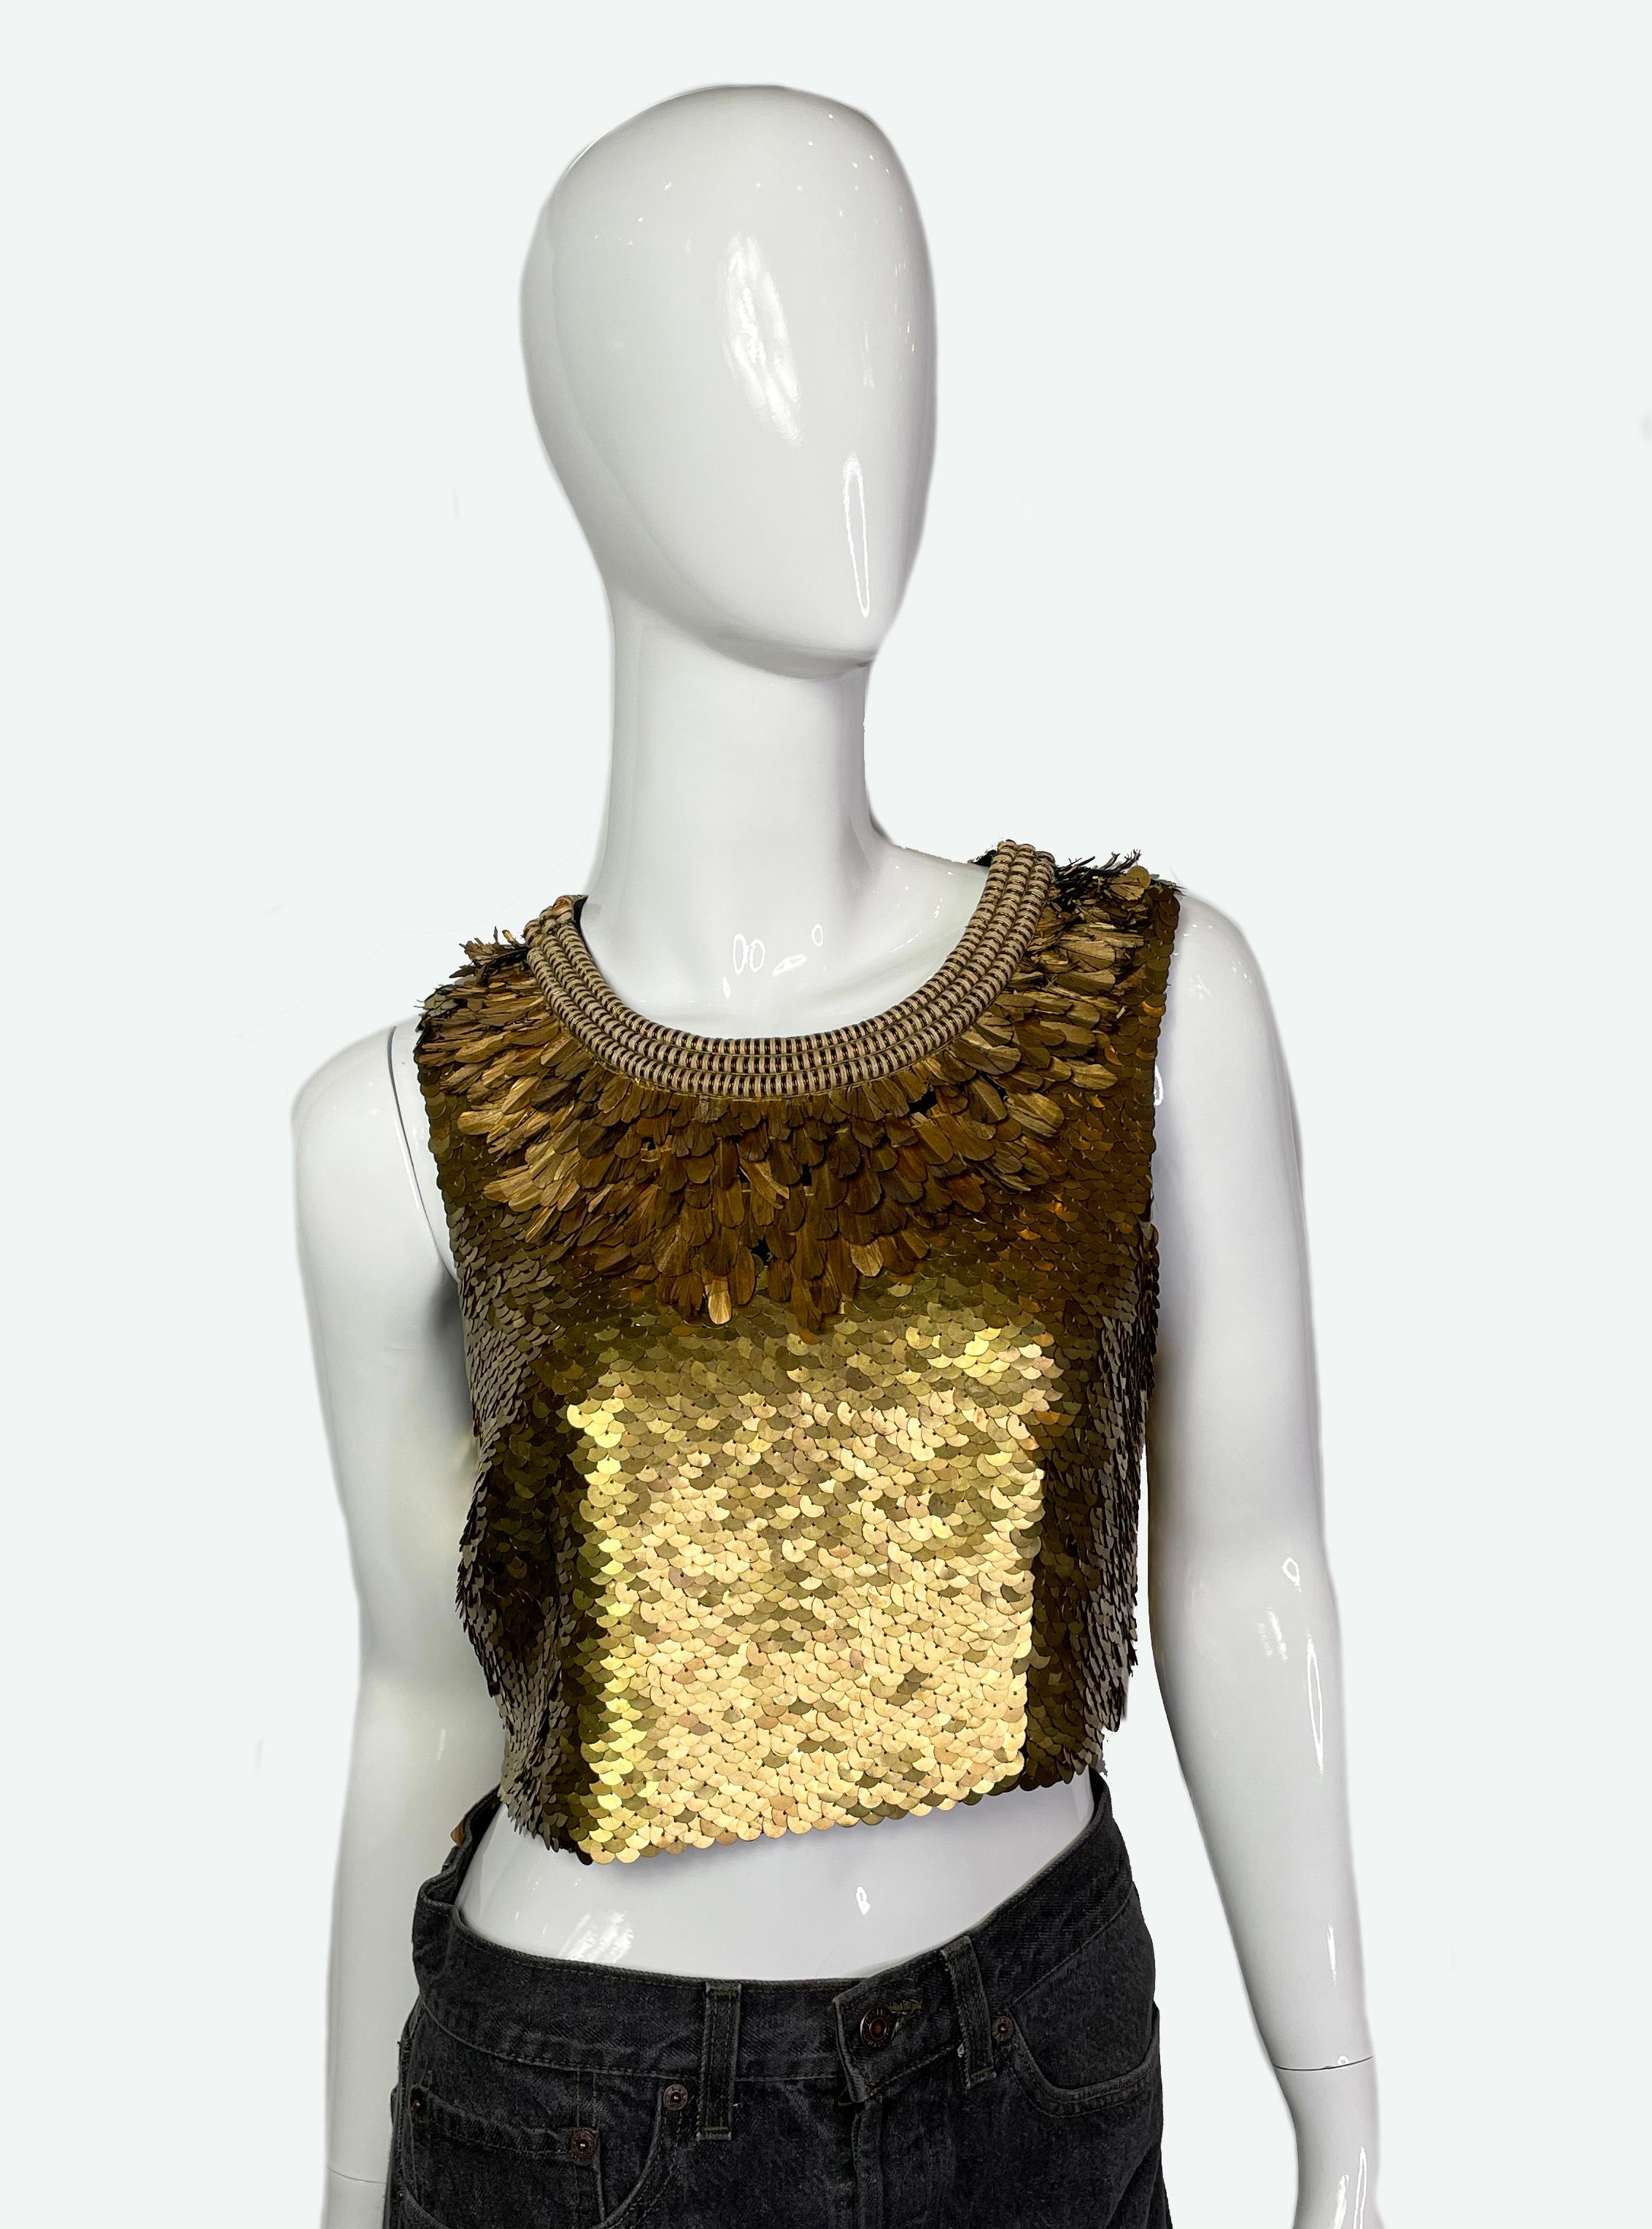 Proenza Schouler cropped  silk top hand-embroidered with gold metal sequins and feathers.

Fastened with 3 buttons on the shoulder. Fully silk lined.

Year: 2014

Size - 8/S

Measurements: 
Length - 38cm 
Width - 36cm 

Condition: perfect, no signs